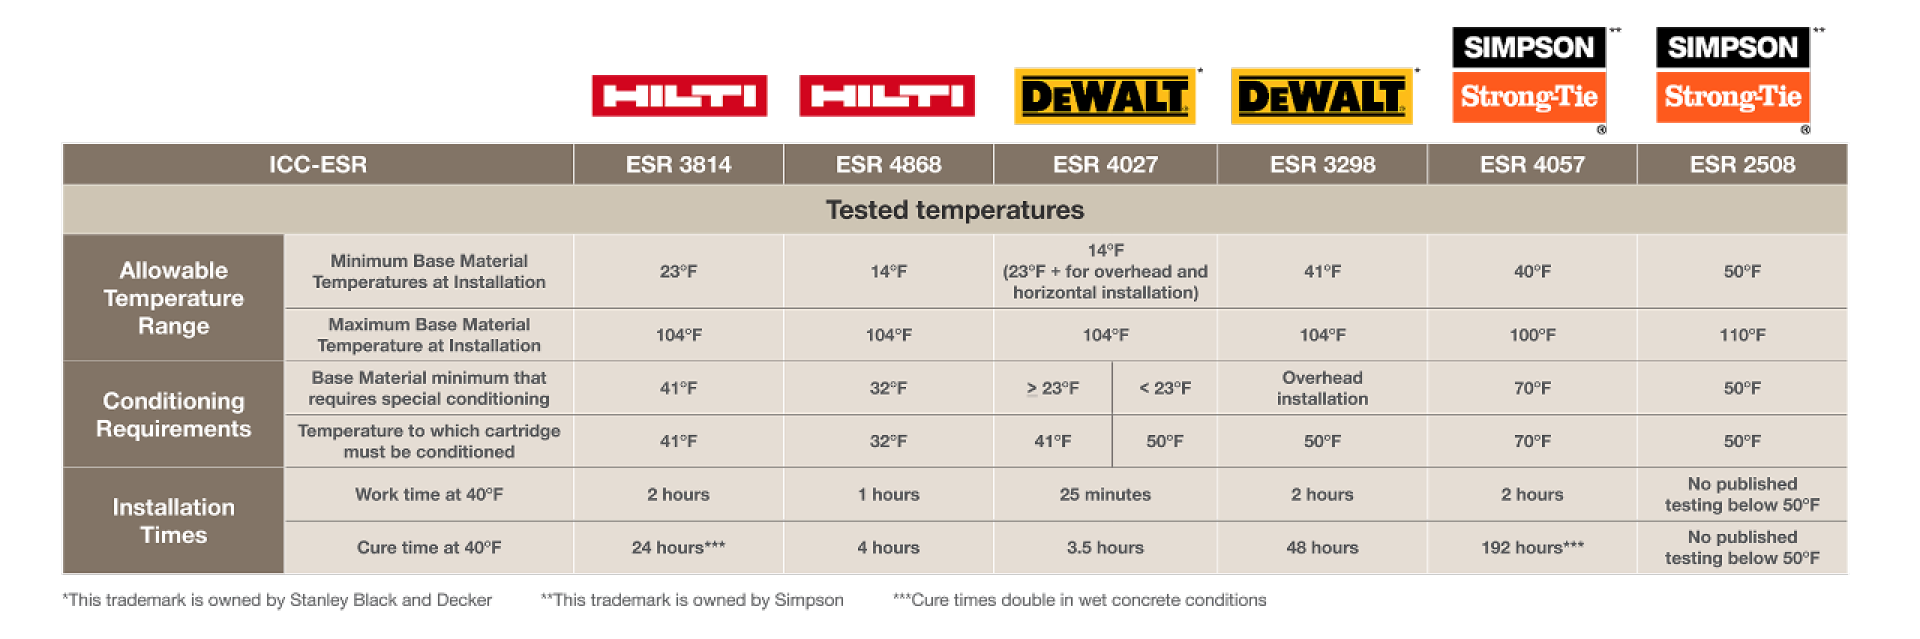 Hilti Beyond Bond vs. DeWalt vs. Simpson StrongTie ICC ESR by temperature comparison table; ESR 3814; ESR 4868; ESR 4027; ESR 3298; ESR 4057; ESR 2508; tested temperatures; allowable temperature range; minimum base material temperatures at installation; 23°F; 14°F; (23°F+ or overhead and horizontal installation); 41°F; 40°F; 50°F; maximum base material temperature at installation; 104°F; 100°F; 110°F; conditioning requirements; base material minimum that requires special conditioning; 32°F; <>; overhead installation; 70°F; temperature to which cartridge must be conditioned; installation times; work time at 40°F; 2 hours; 1 hour; 25 minutes; no published testing below 50°F; cure time at 40°F; 24 hours; 4 hours; 3.5 hours; 48 hours; 192 hours; this trademark is owned by Stanley Black and Decker; this trademark is owned by Simpson; cure times double in wet concrete conditions